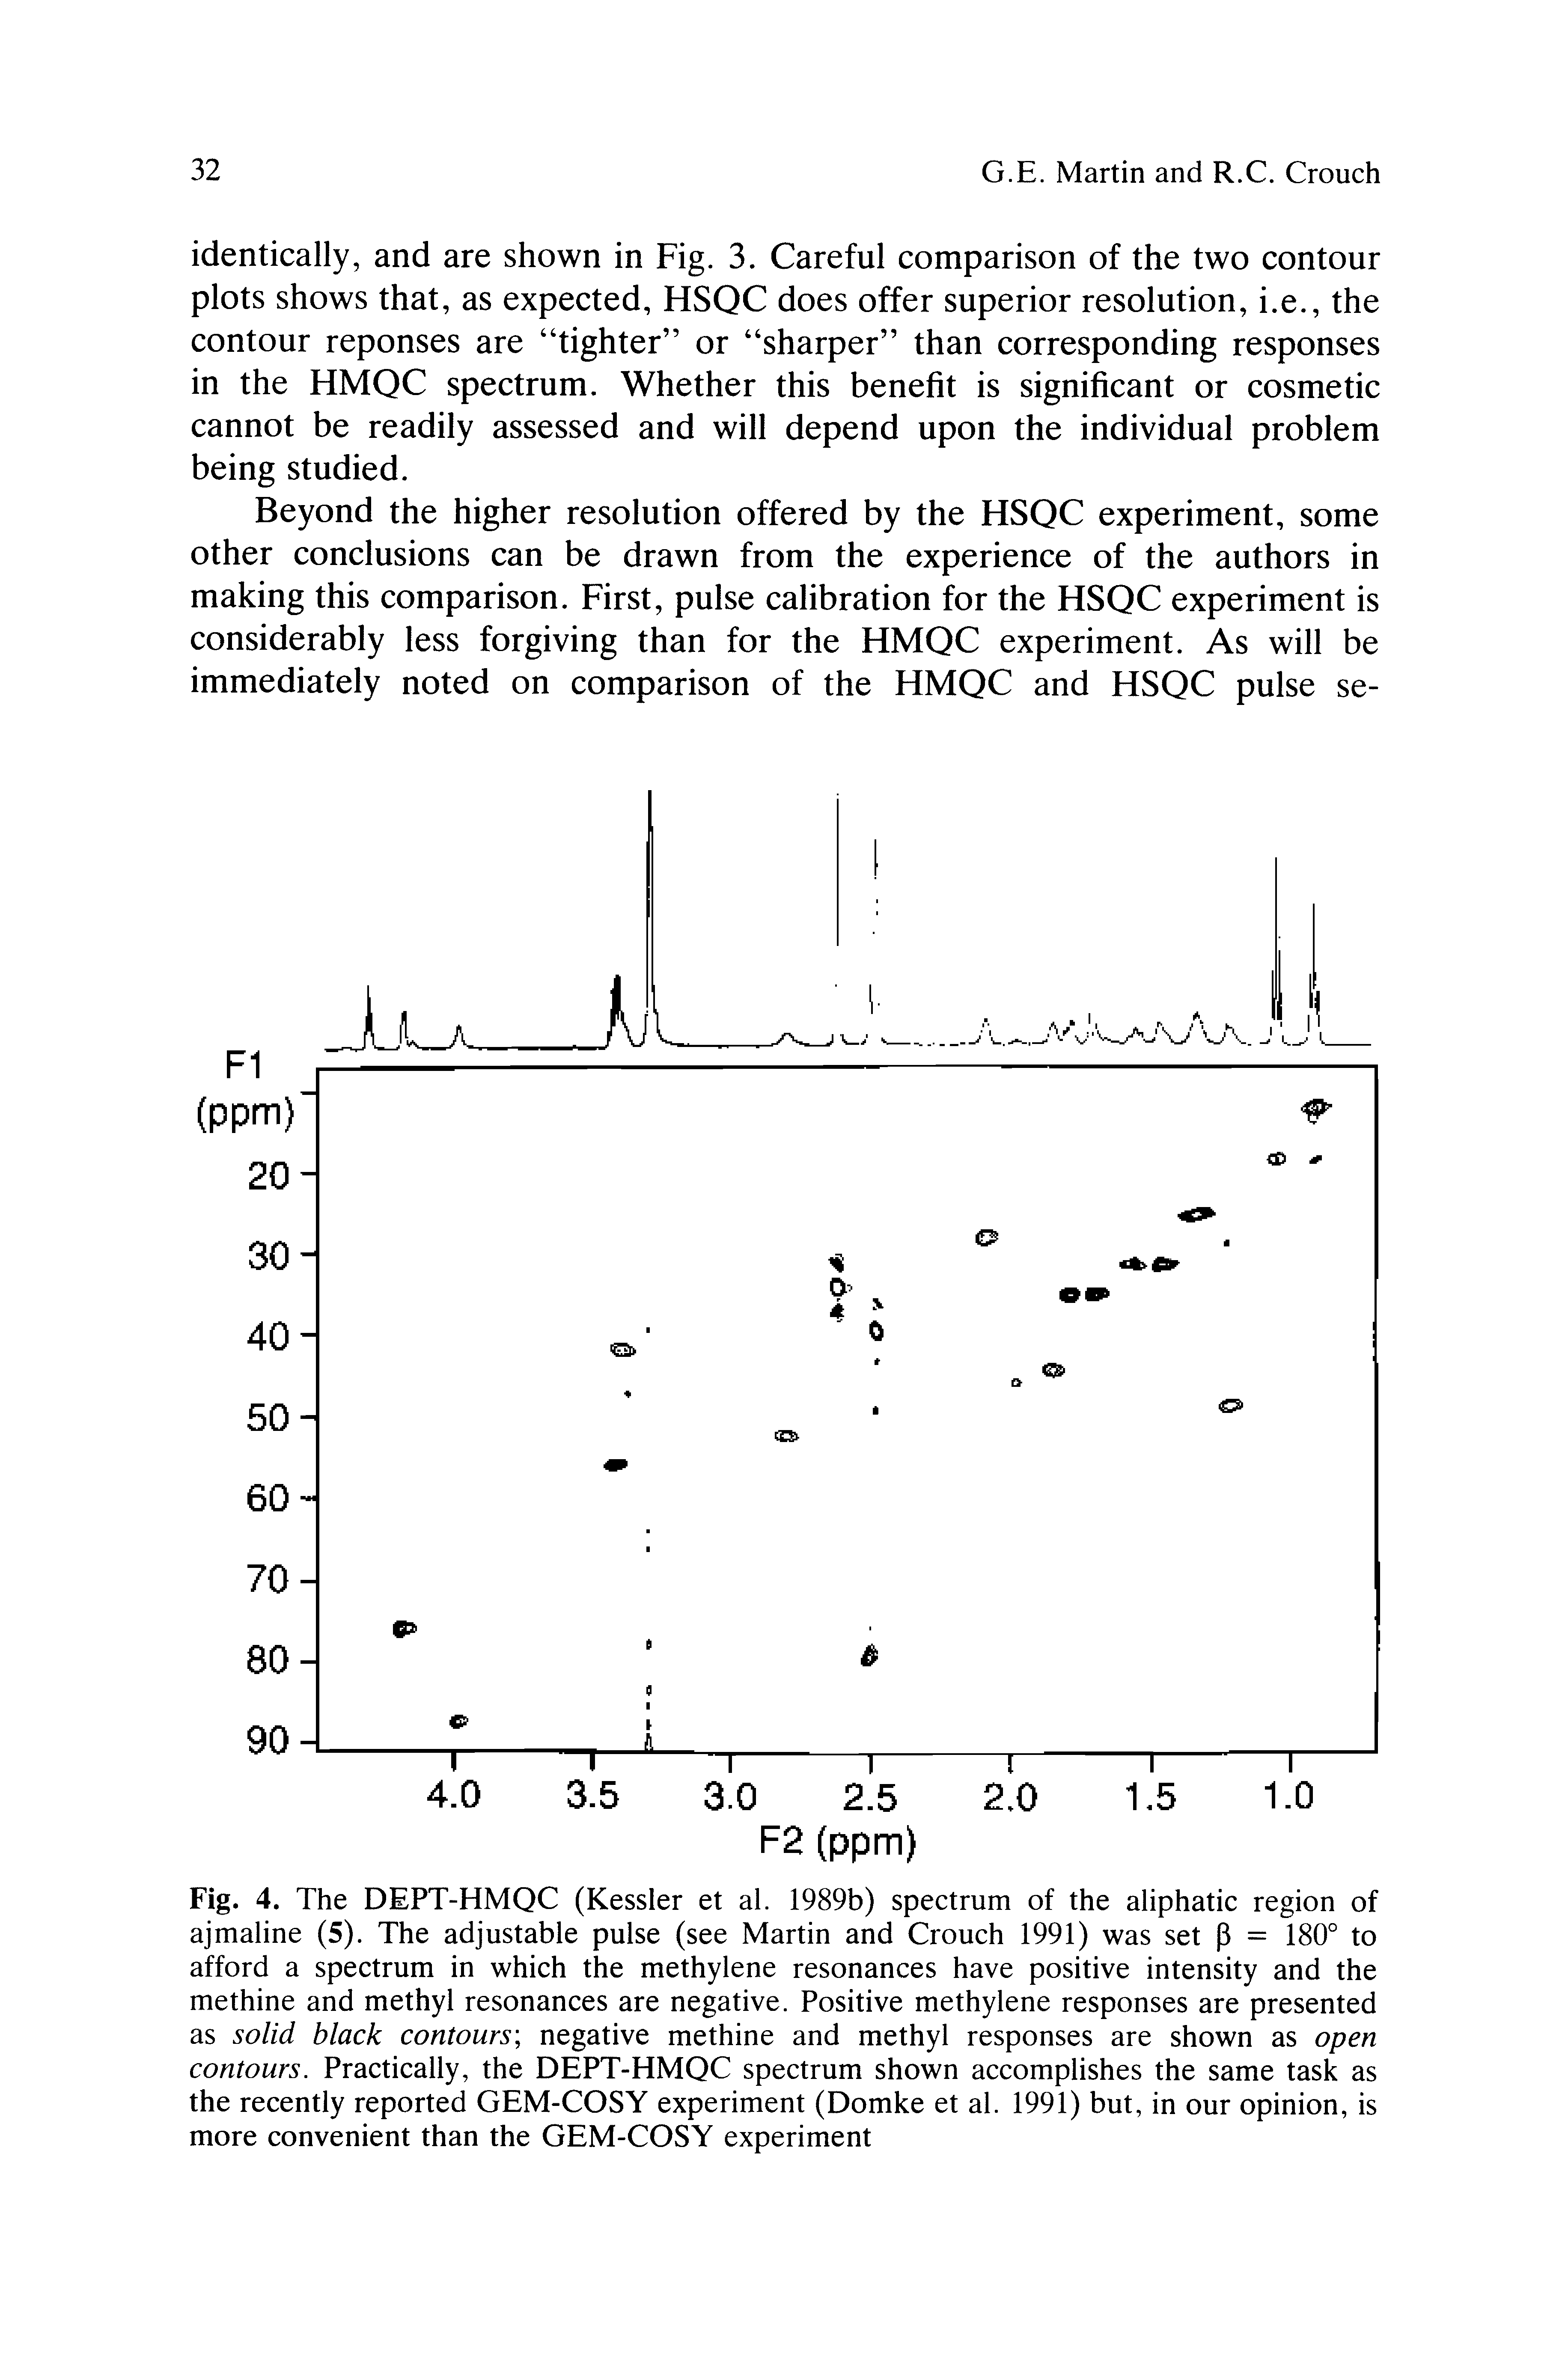 Fig. 4. The DEPT-HMQC (Kessler et al. 1989b) spectrum of the aliphatic region of ajmaline (5). The adjustable pulse (see Martin and Crouch 1991) was set p = 180° to afford a spectrum in which the methylene resonances have positive intensity and the methine and methyl resonances are negative. Positive methylene responses are presented as solid black contours negative methine and methyl responses are shown as open contours. Practically, the DEPT-HMQC spectrum shown accomplishes the same task as the recently reported GEM-COSY experiment (Domke et al. 1991) but, in our opinion, is more convenient than the GEM-COSY experiment...